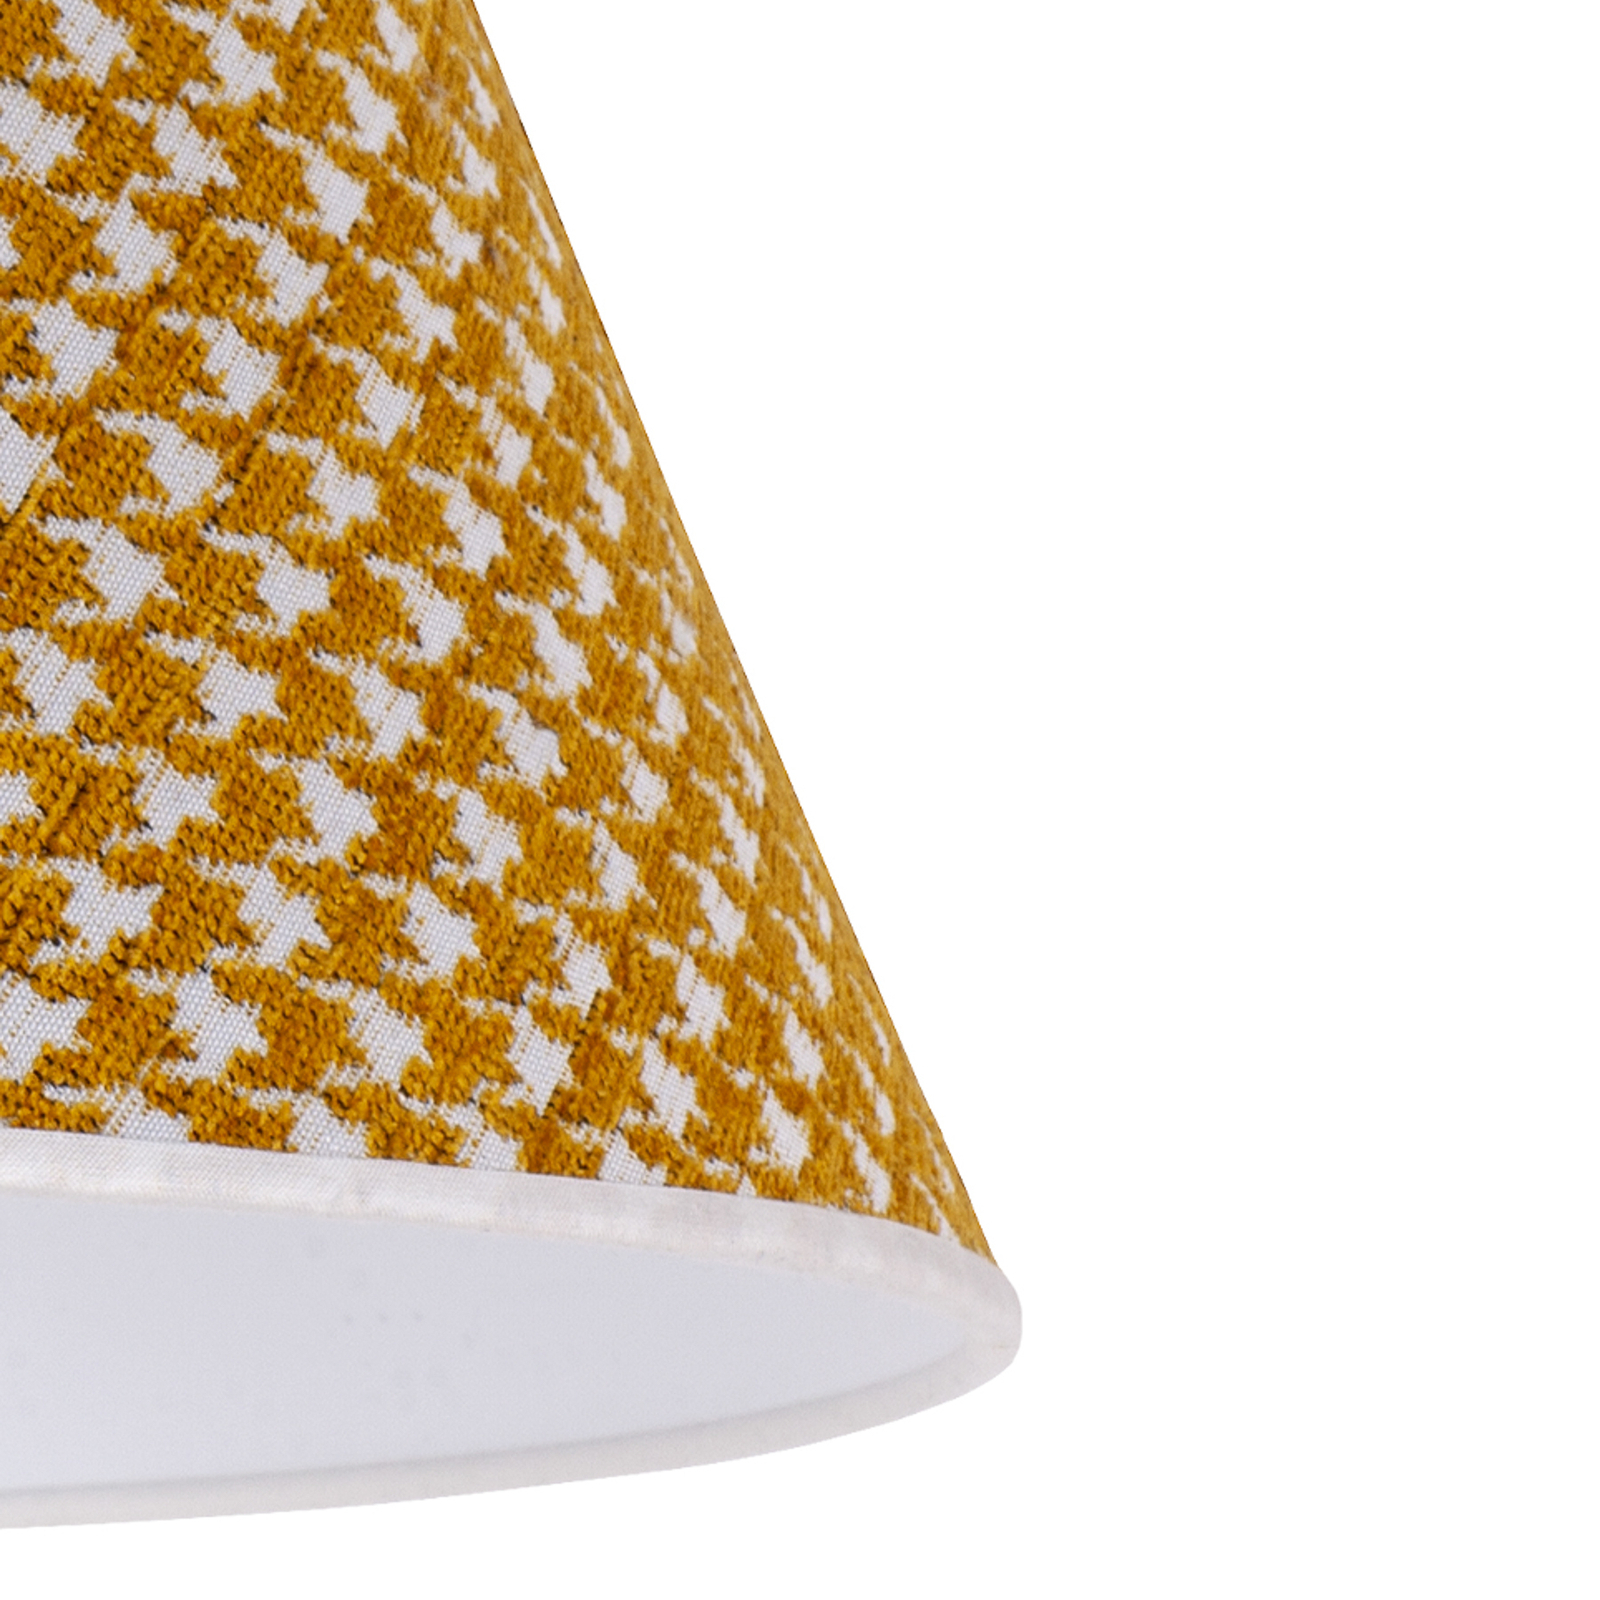 Sofia lampshade 21 cm, houndstooth pattern yellow